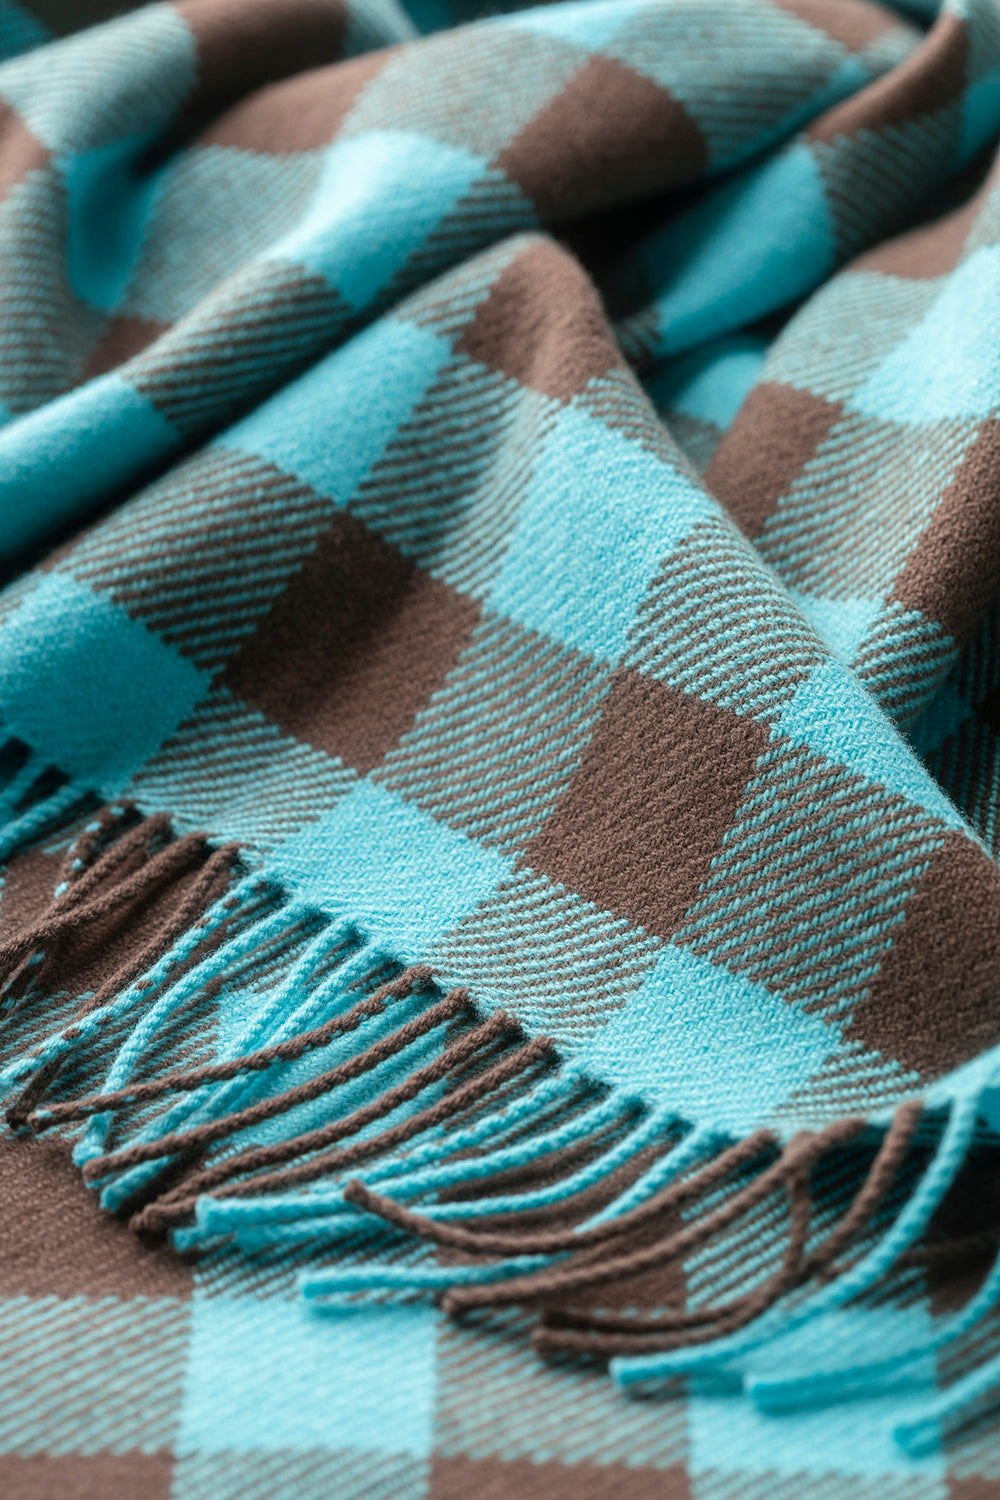 Limited Edition Block Check Throw - Turquoise & Brown